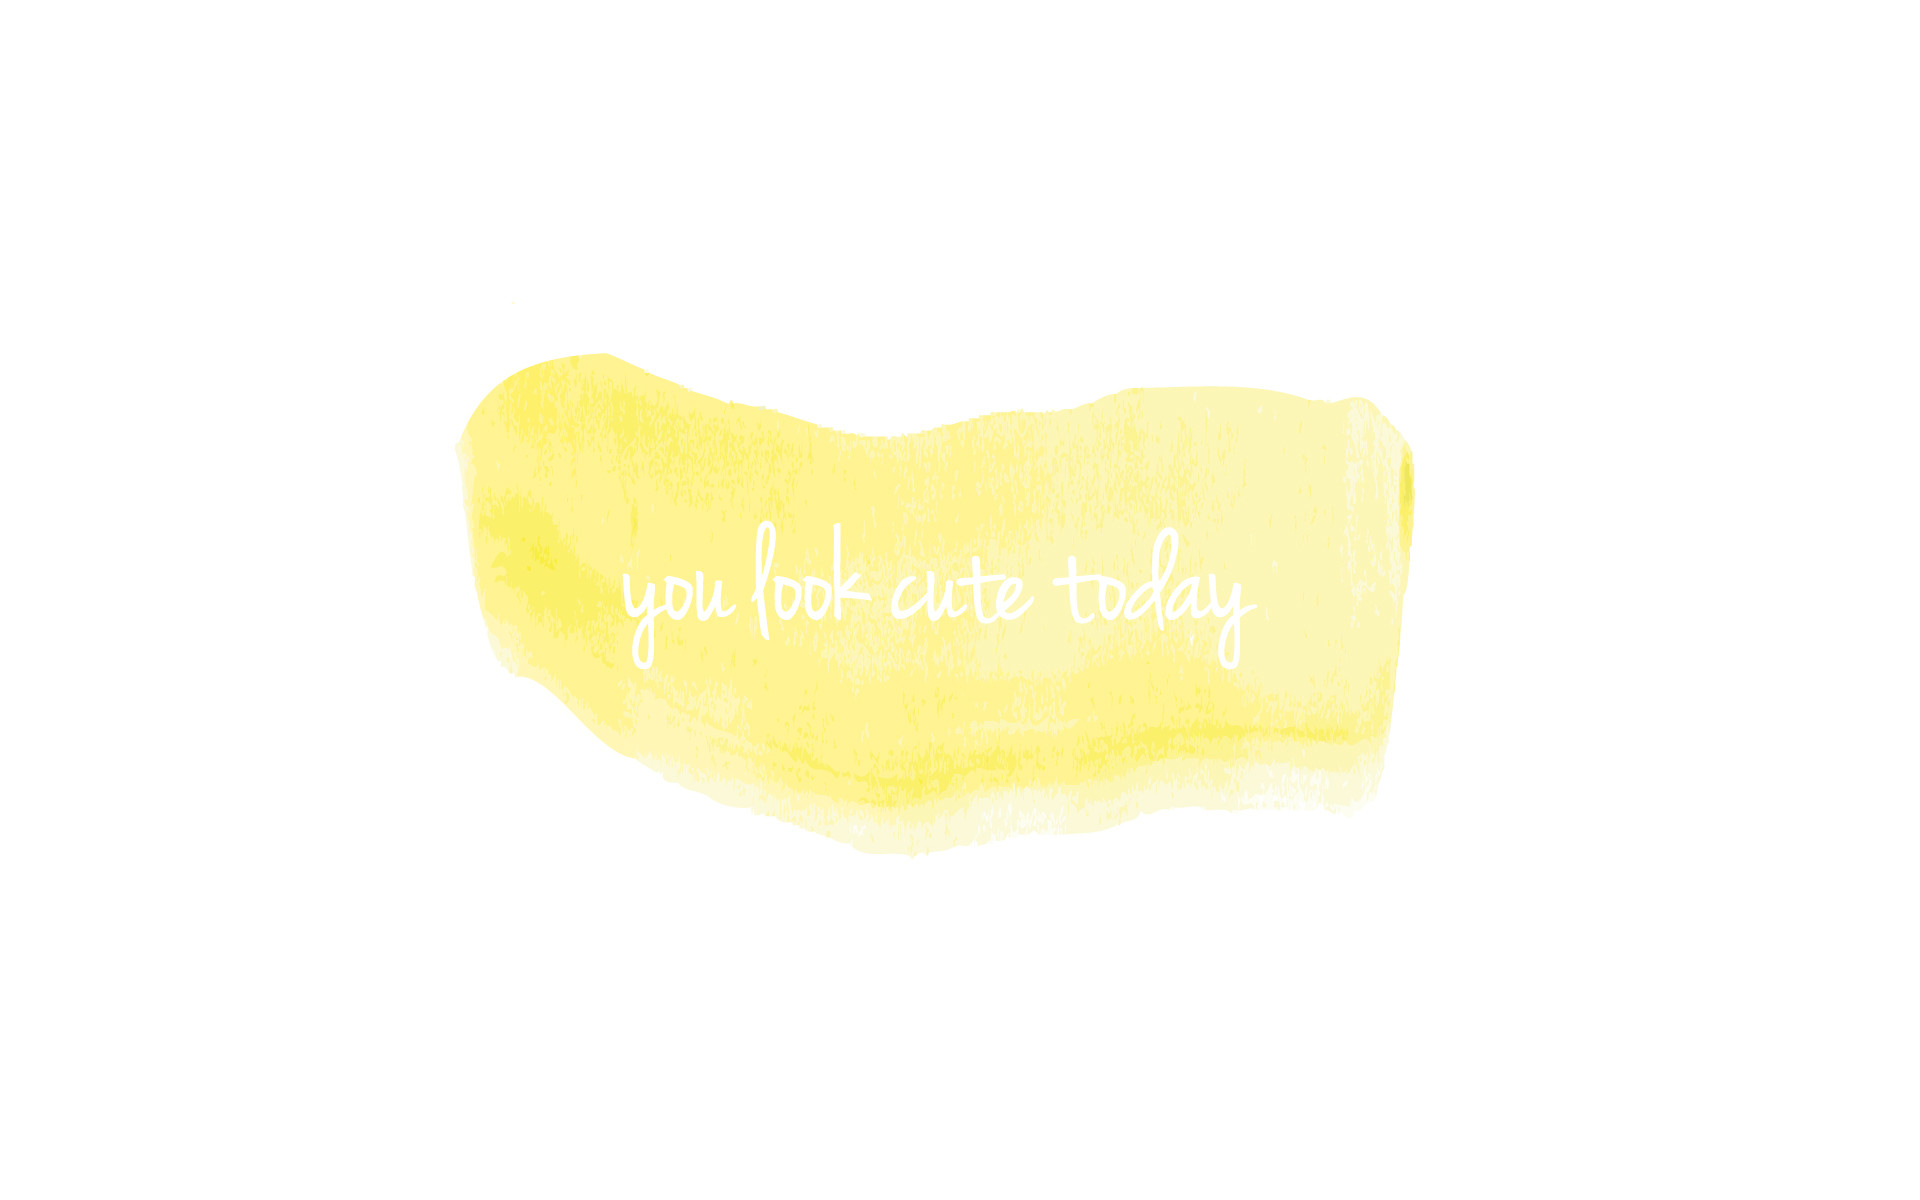 1920x1200 Download You look cute today